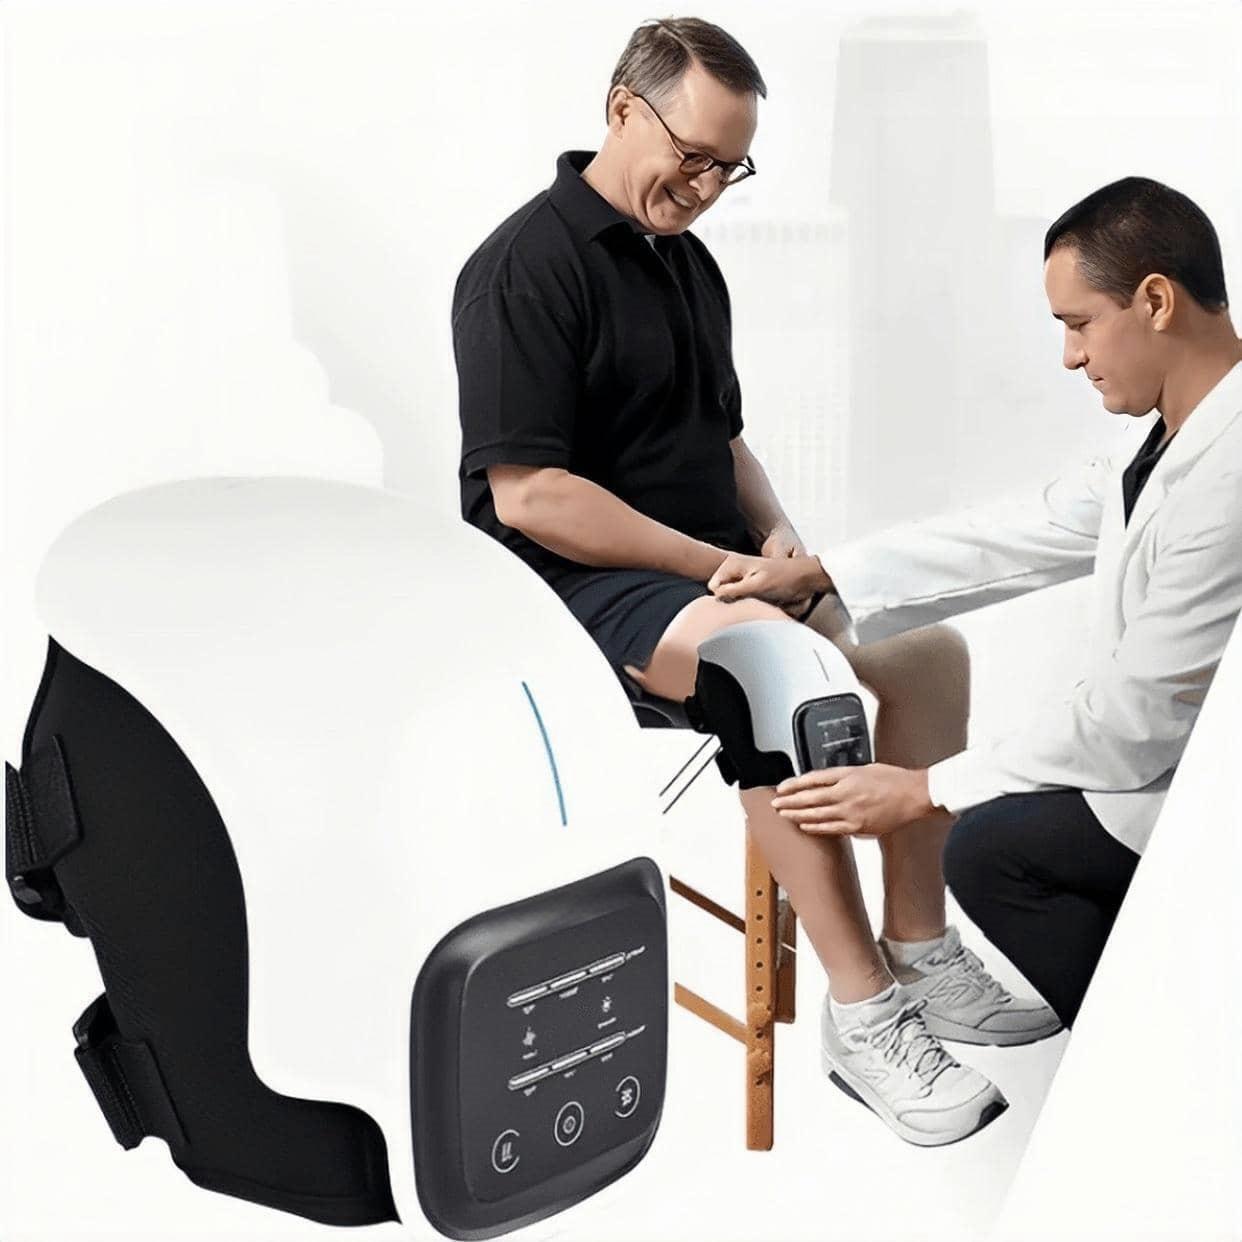 Knee Massager - Temporary Relief From Joint Pain in Just 15 Minutes a 